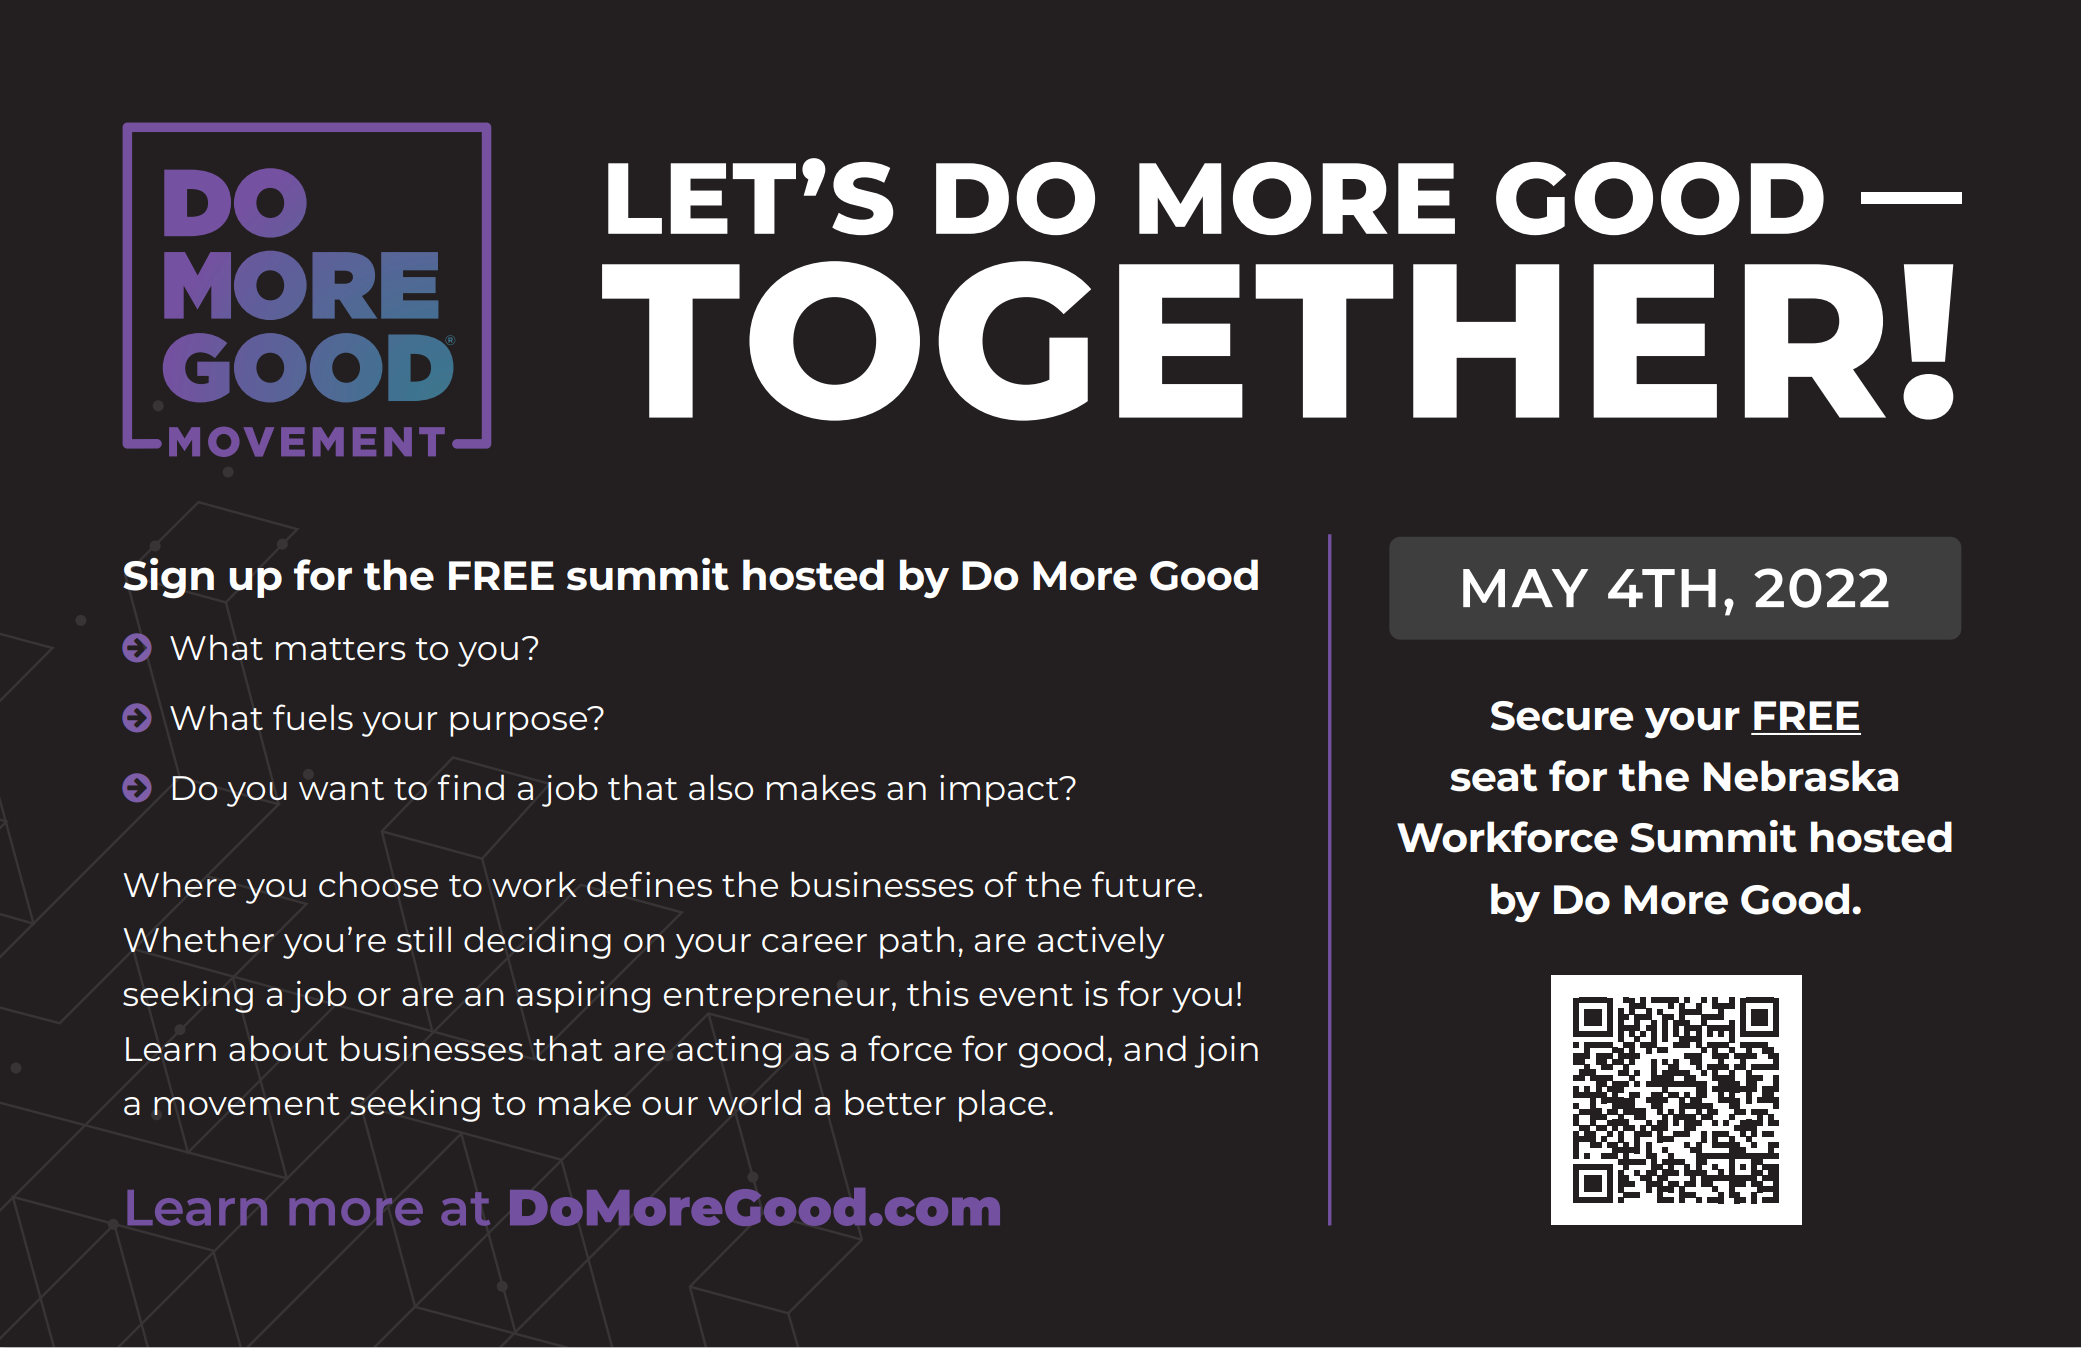 Sign up for the FREE summit hosted by Do More Good!